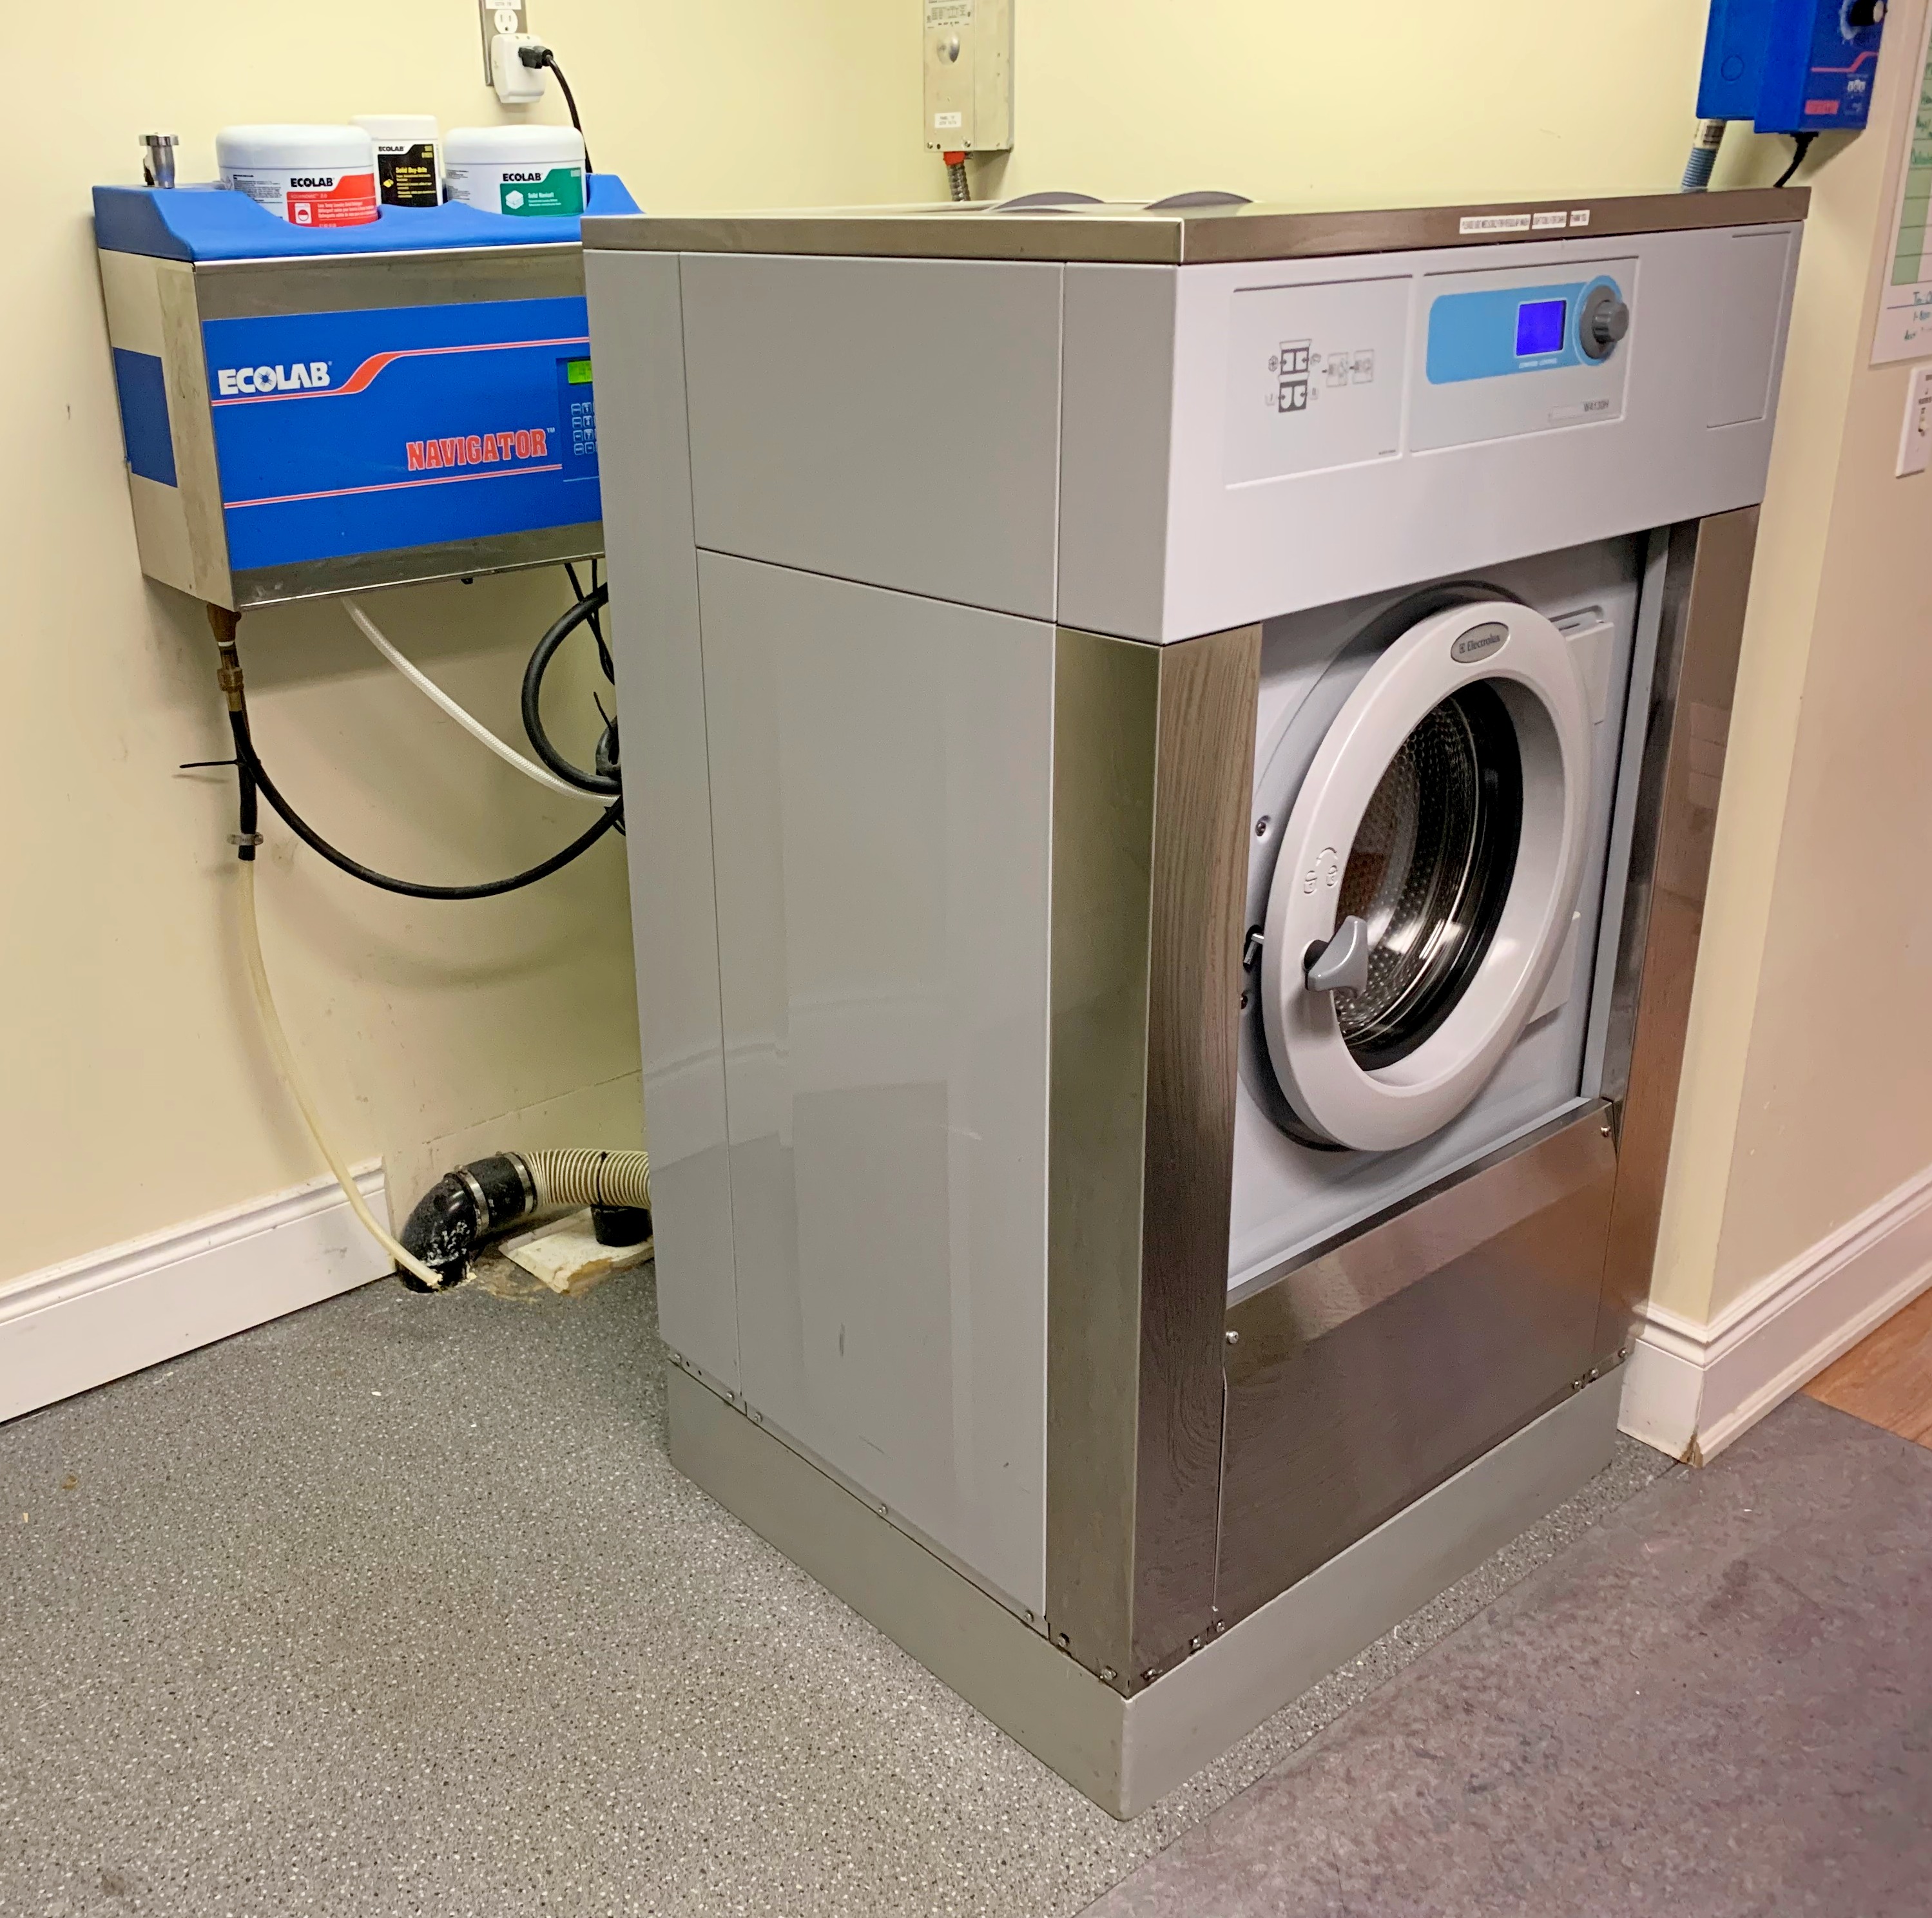 Harco Co. Ltd. on Twitter: "Harco replaced old washer with a new Unimac  softmount unit at Hospice in Oakville. Washer was placed on a 6 inch steel  base for ease of accessibility